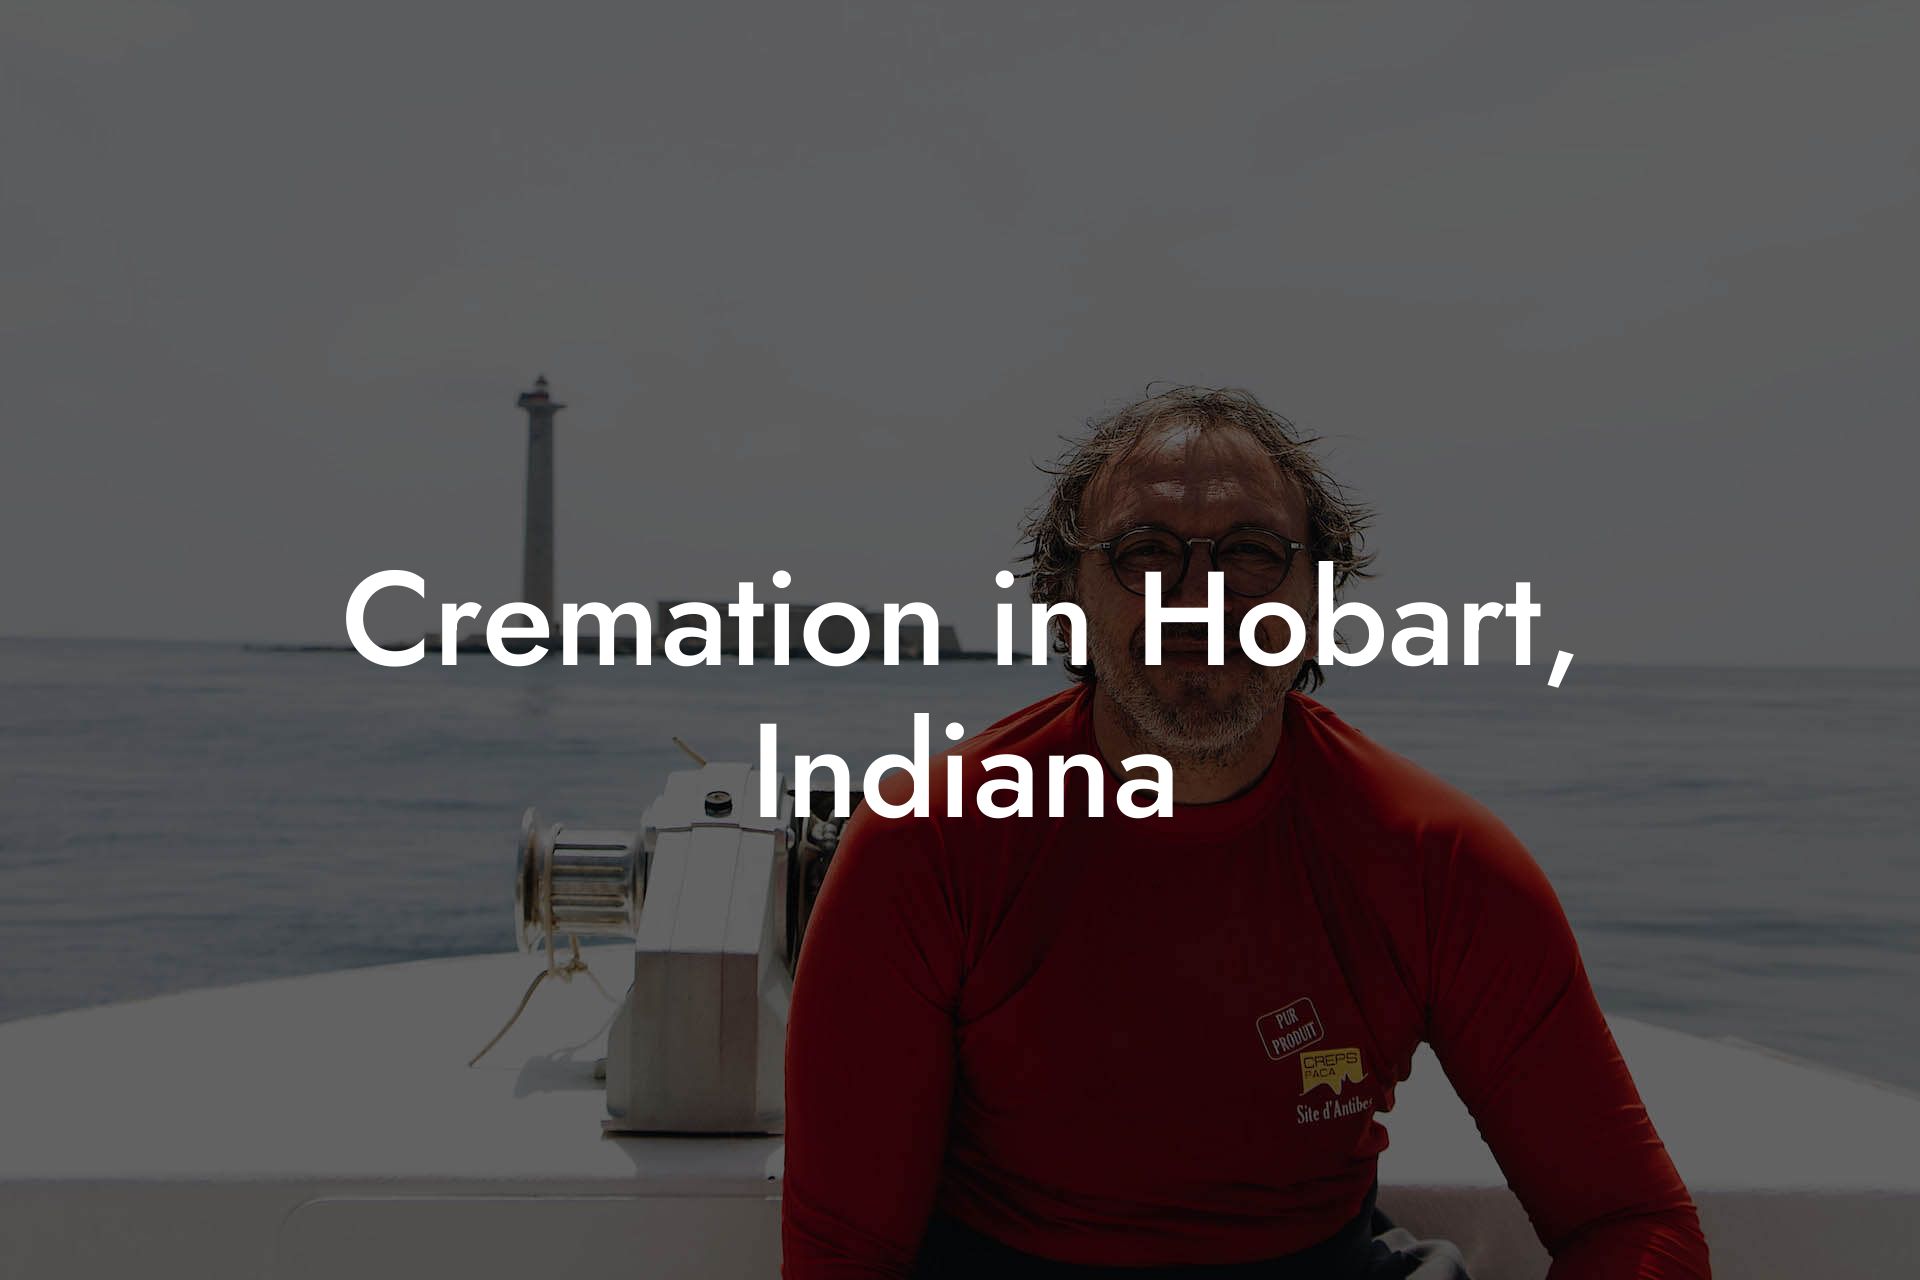 Cremation in Hobart, Indiana